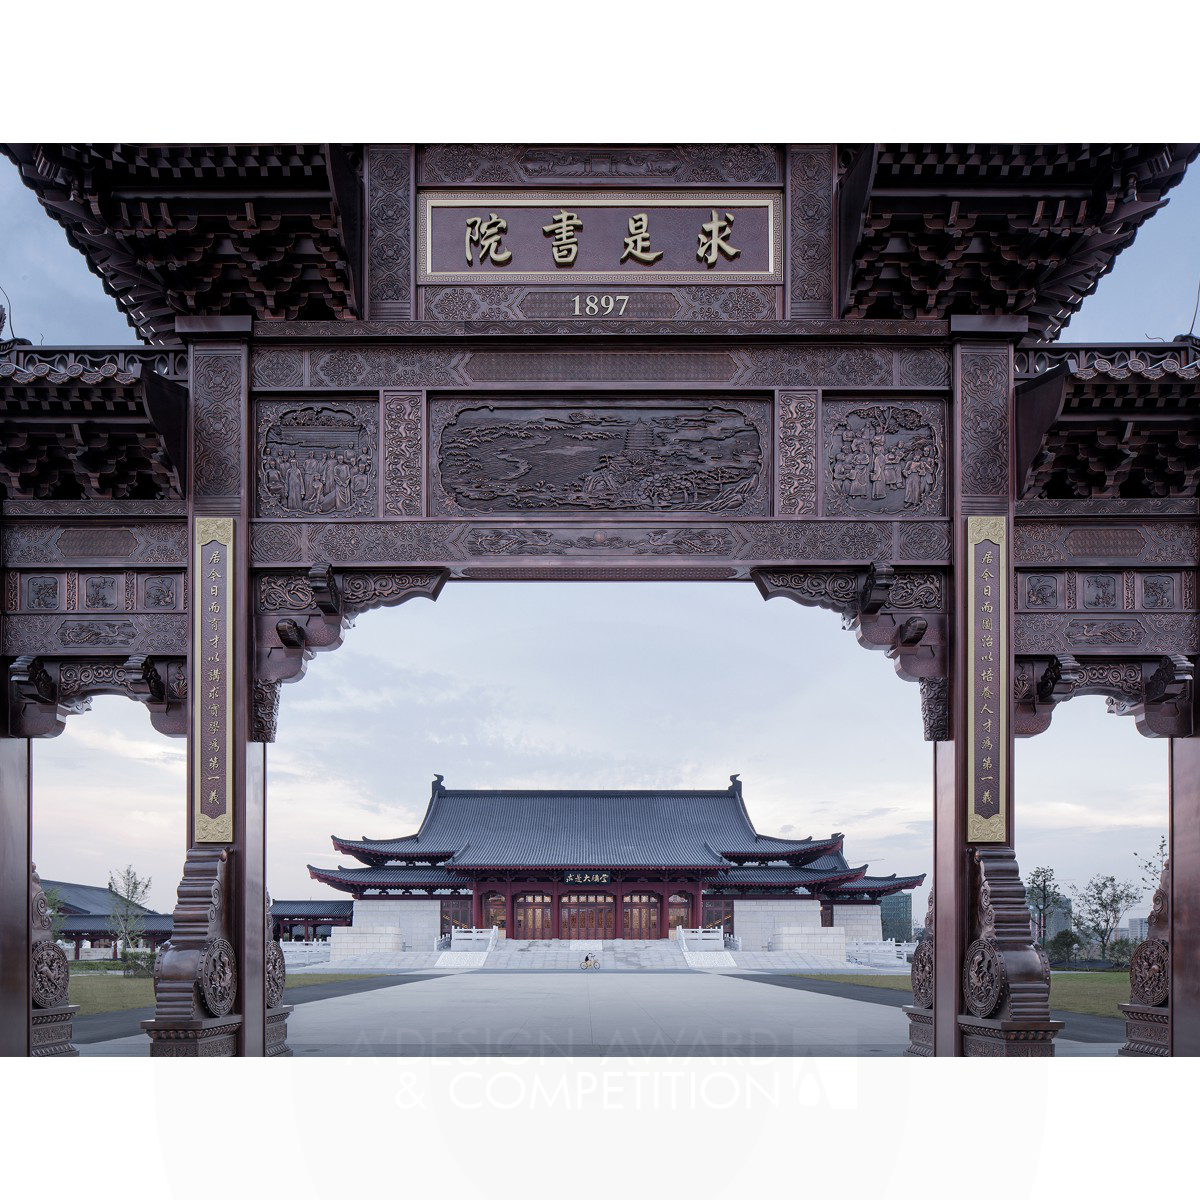 Qiushi Academy: A Fusion of Modern Functionality and Traditional Chinese Architecture